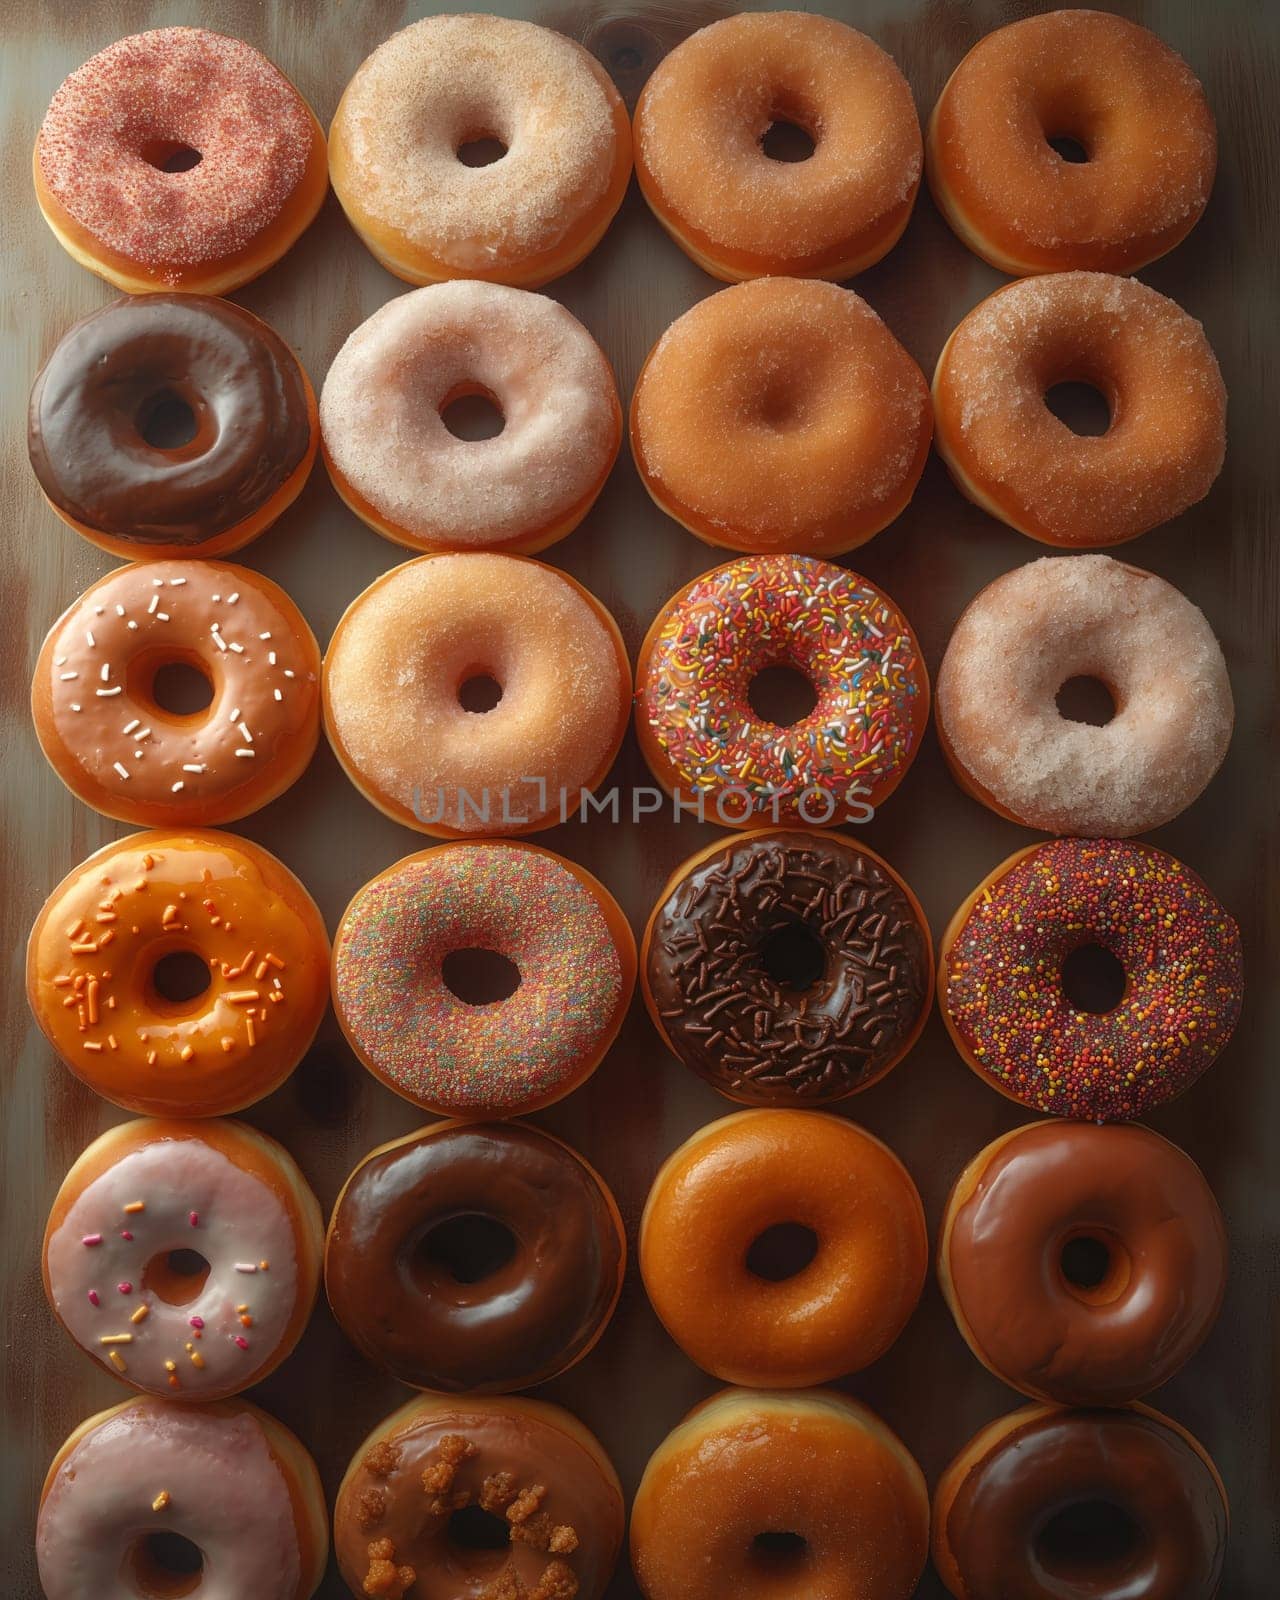 An assortment of delicious donuts on the table. Selective focus